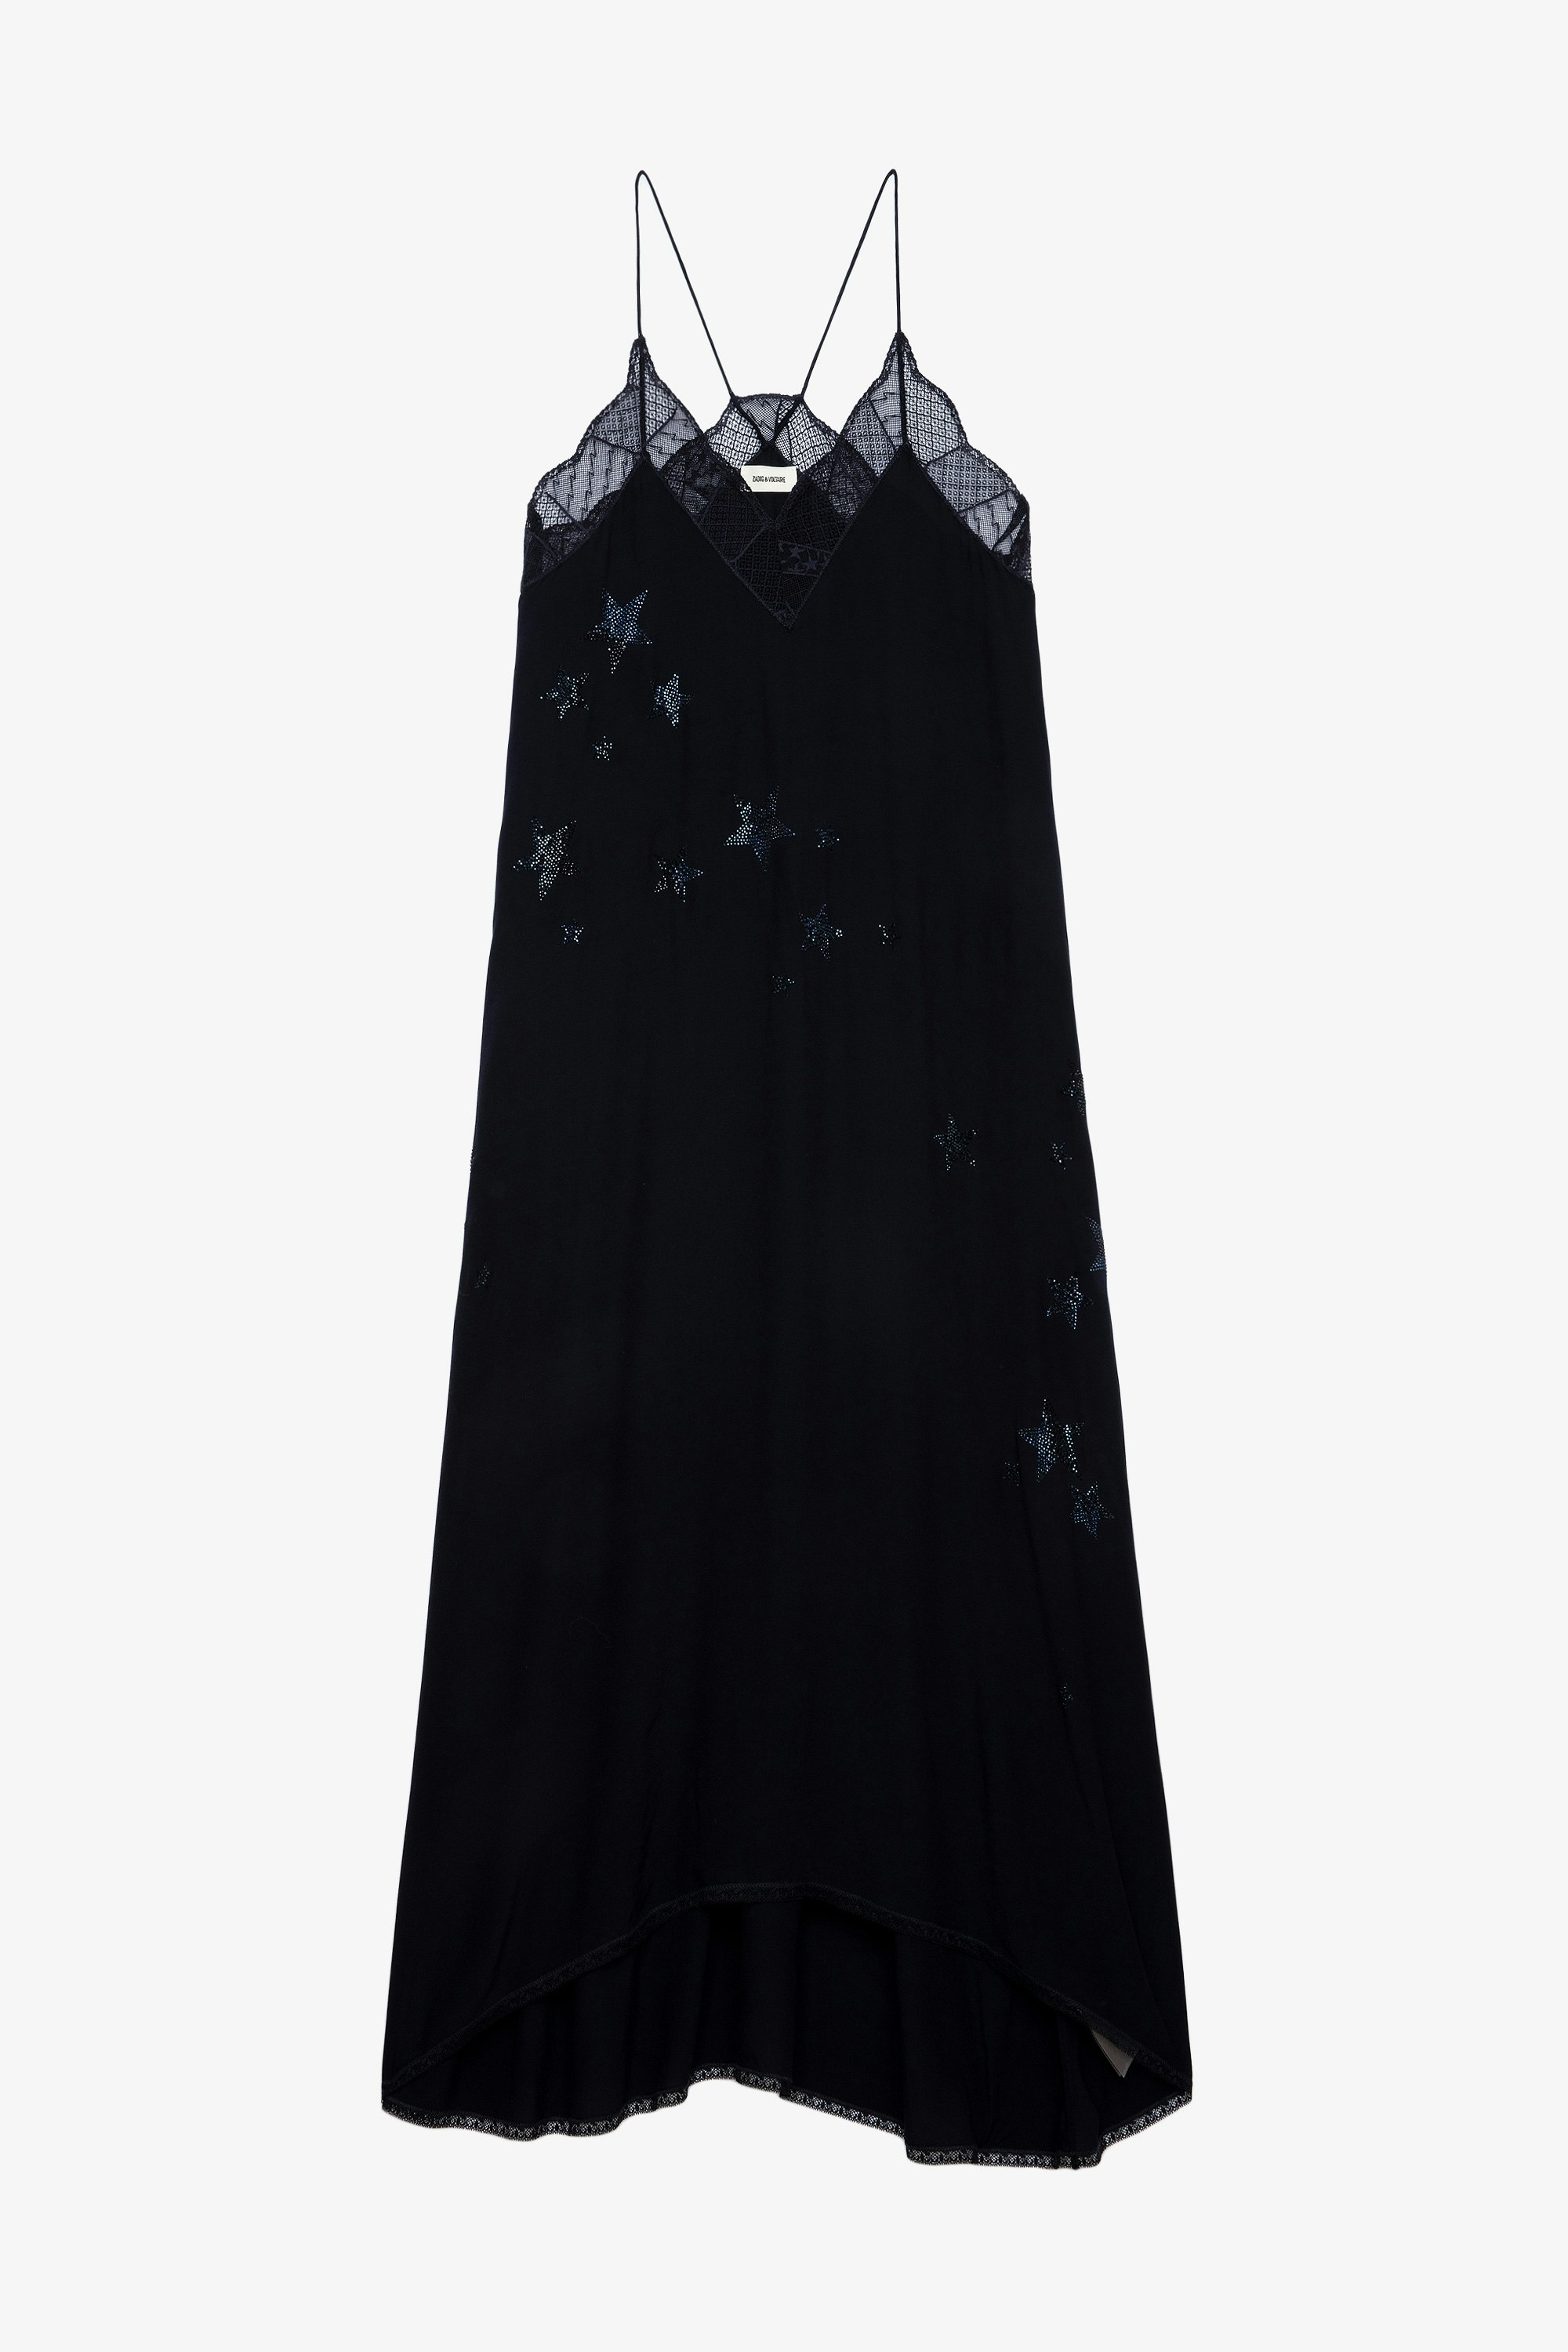 Risty Soft Diamanté Stars Dress Women’s navy blue long dress with lace trim and studded with crystal-embellished stars